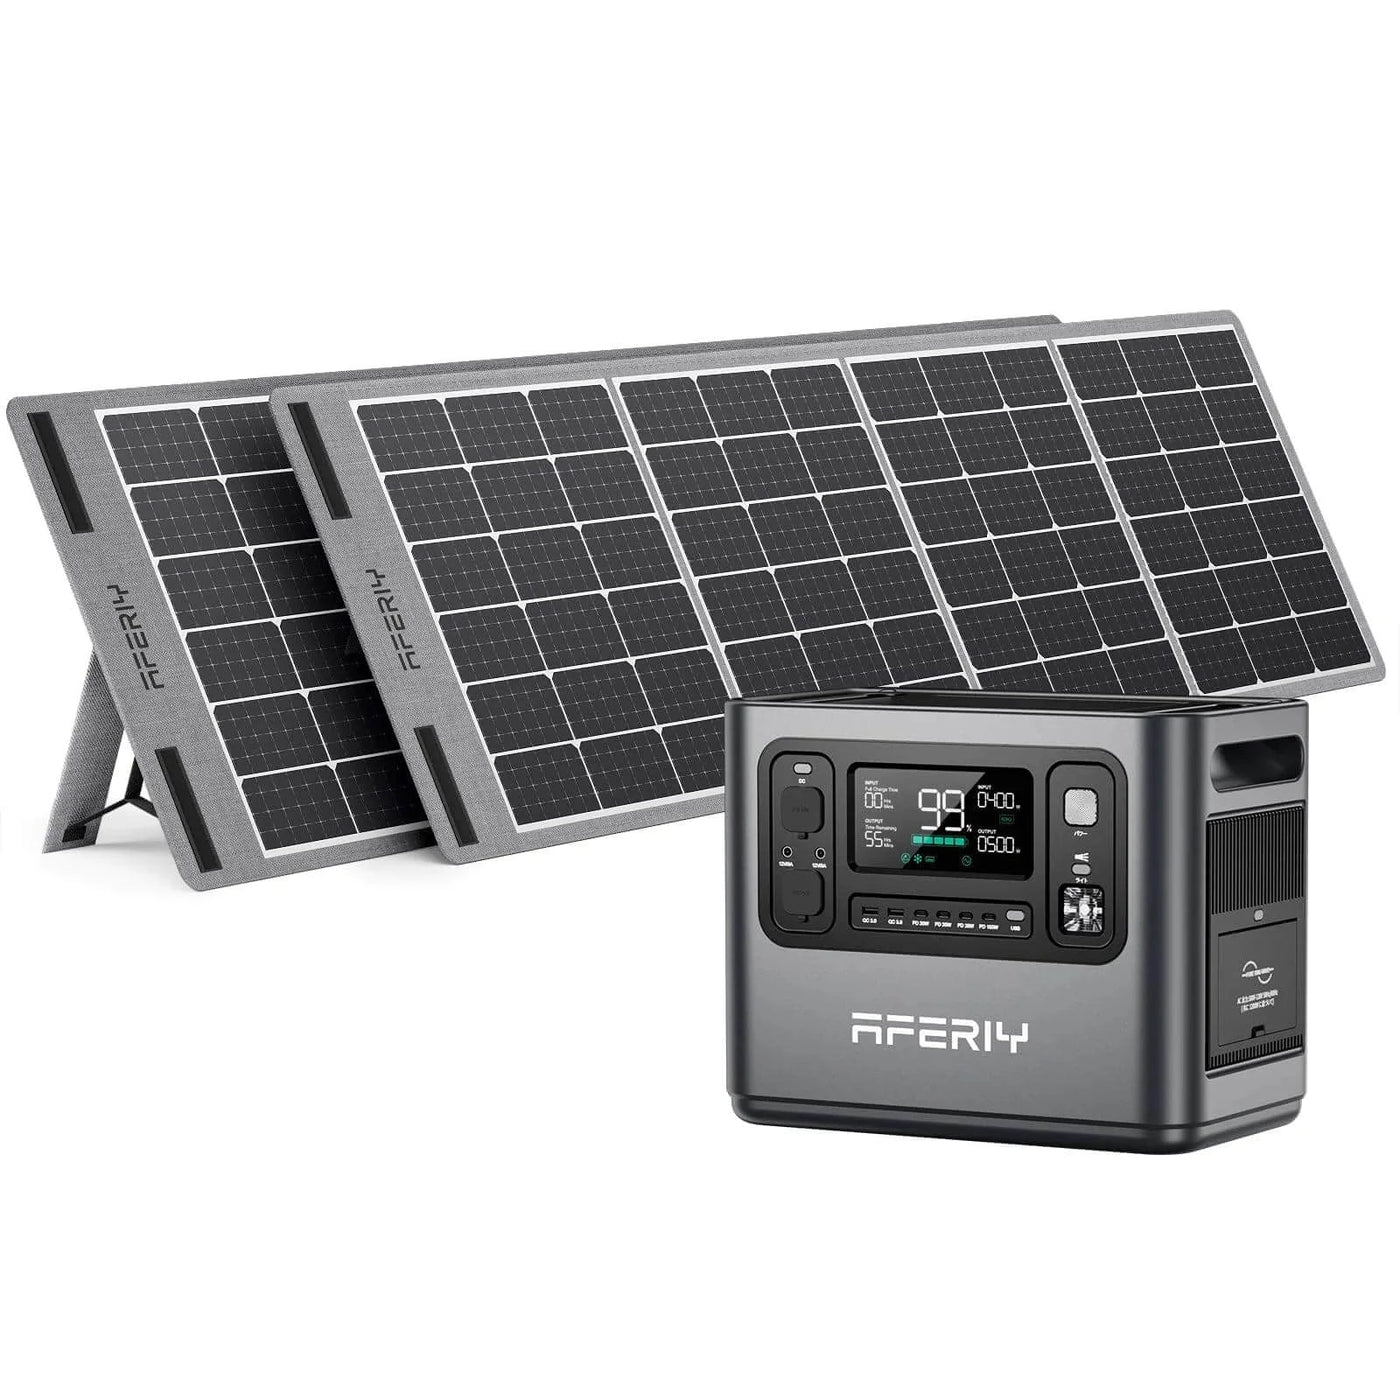 1200 Watt Solar Generator For Camping (200-400 Solar Watts): AFERIY - Front/ Top View Power Station and Two Solar Panels